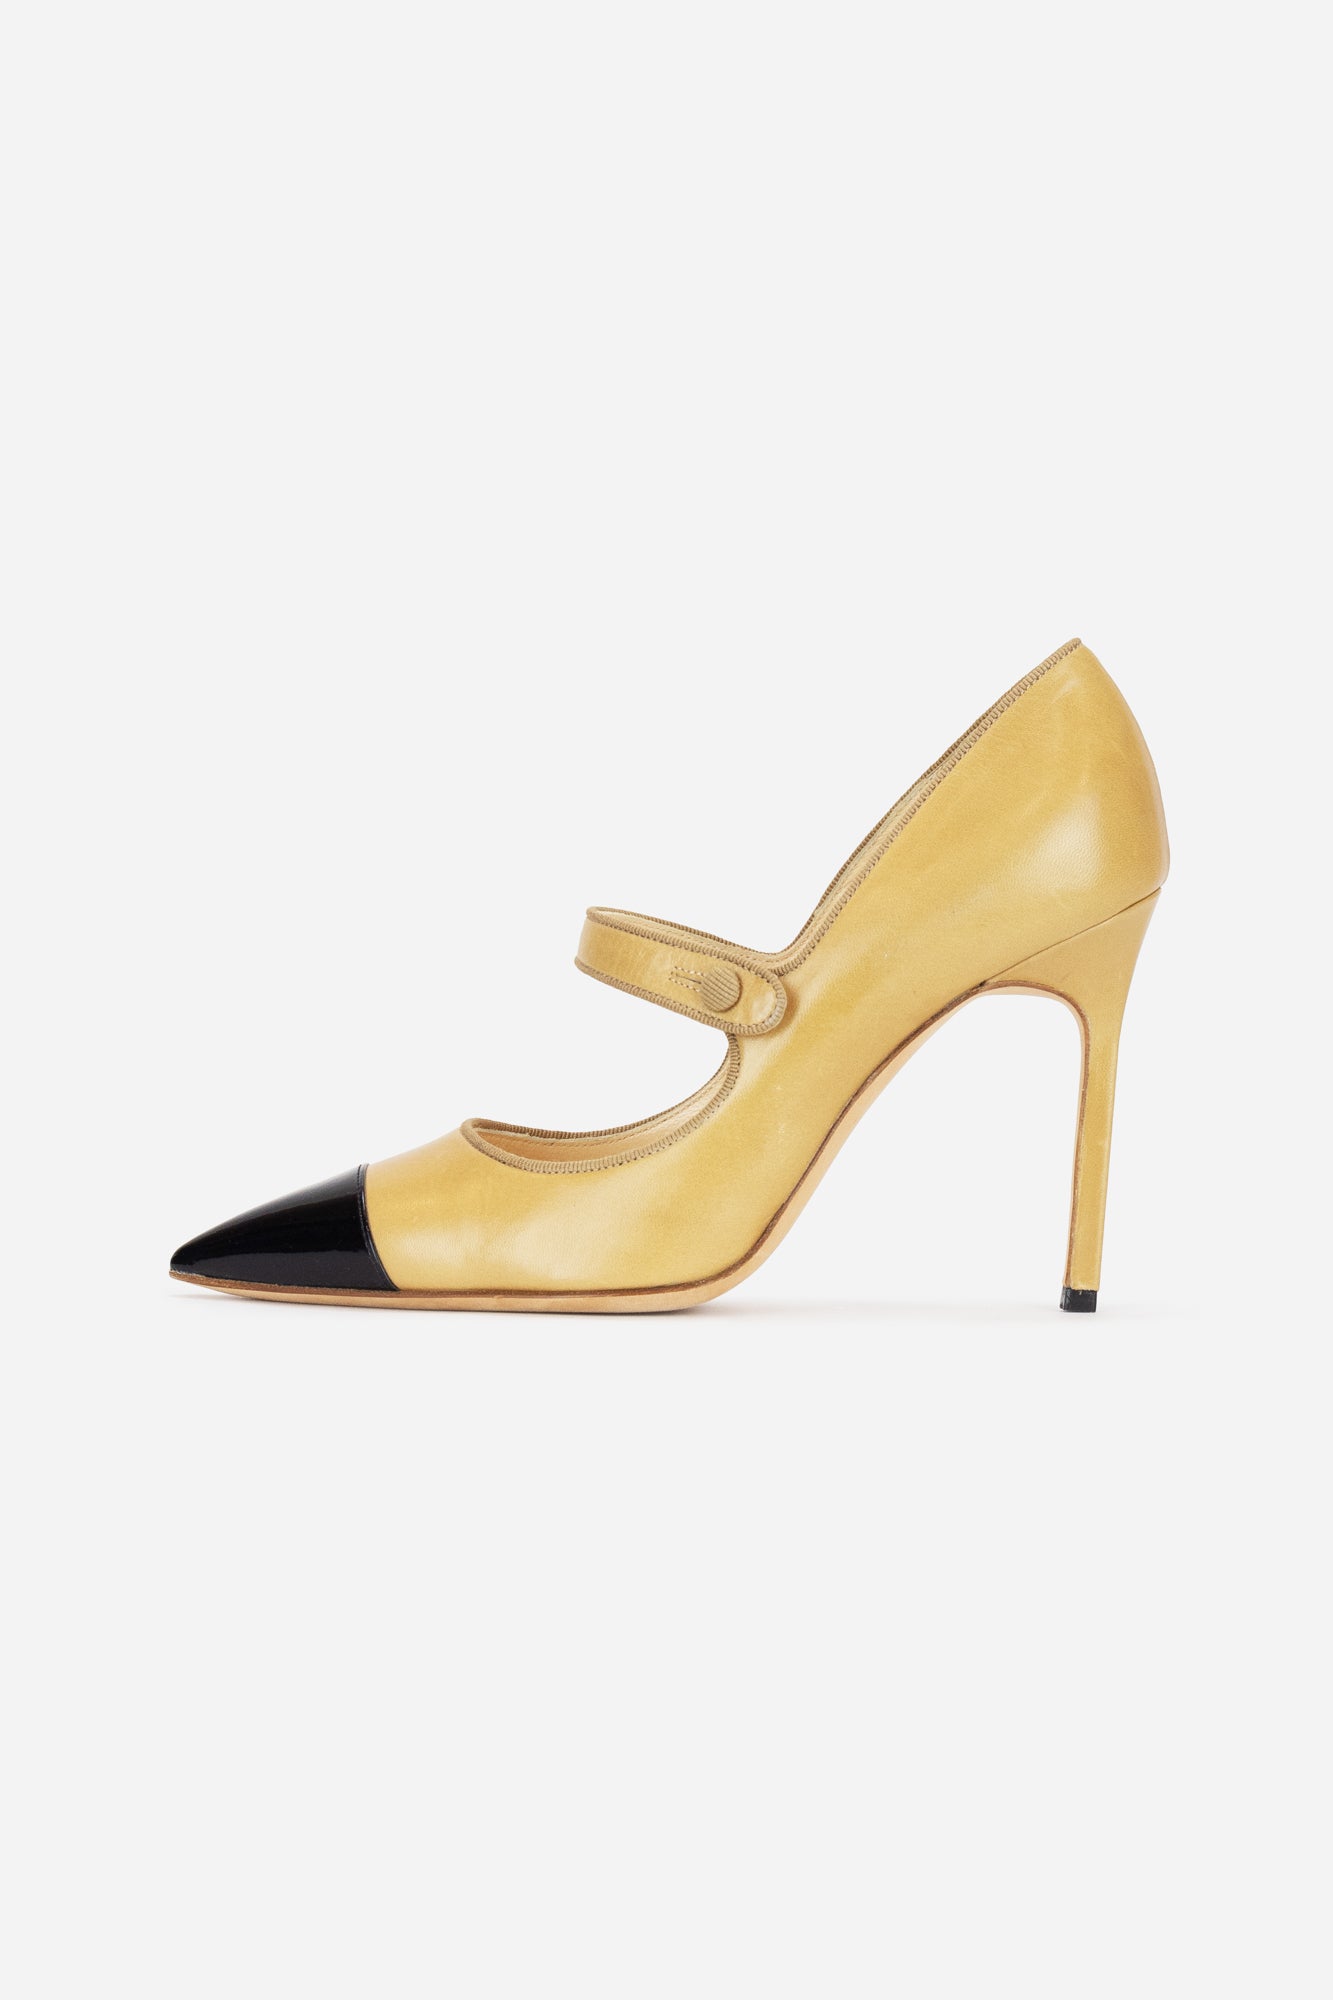 Beige Leather Caparinew Pumps with Black Patent Leather Cap-Toe